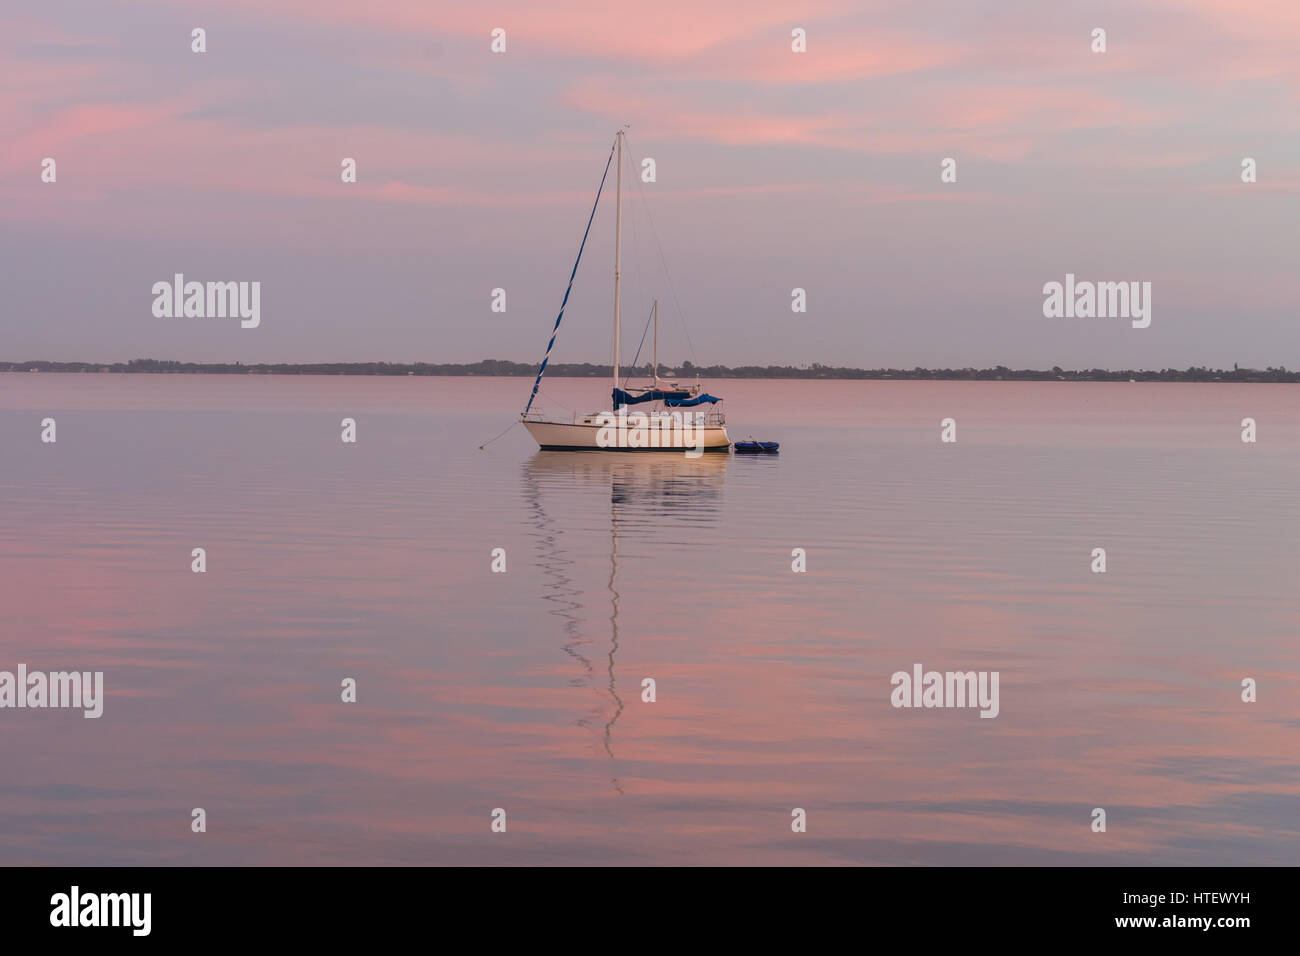 A Sailboat Rests in the Lagoon on an Early Morning in Melbourne, Florida Stock Photo